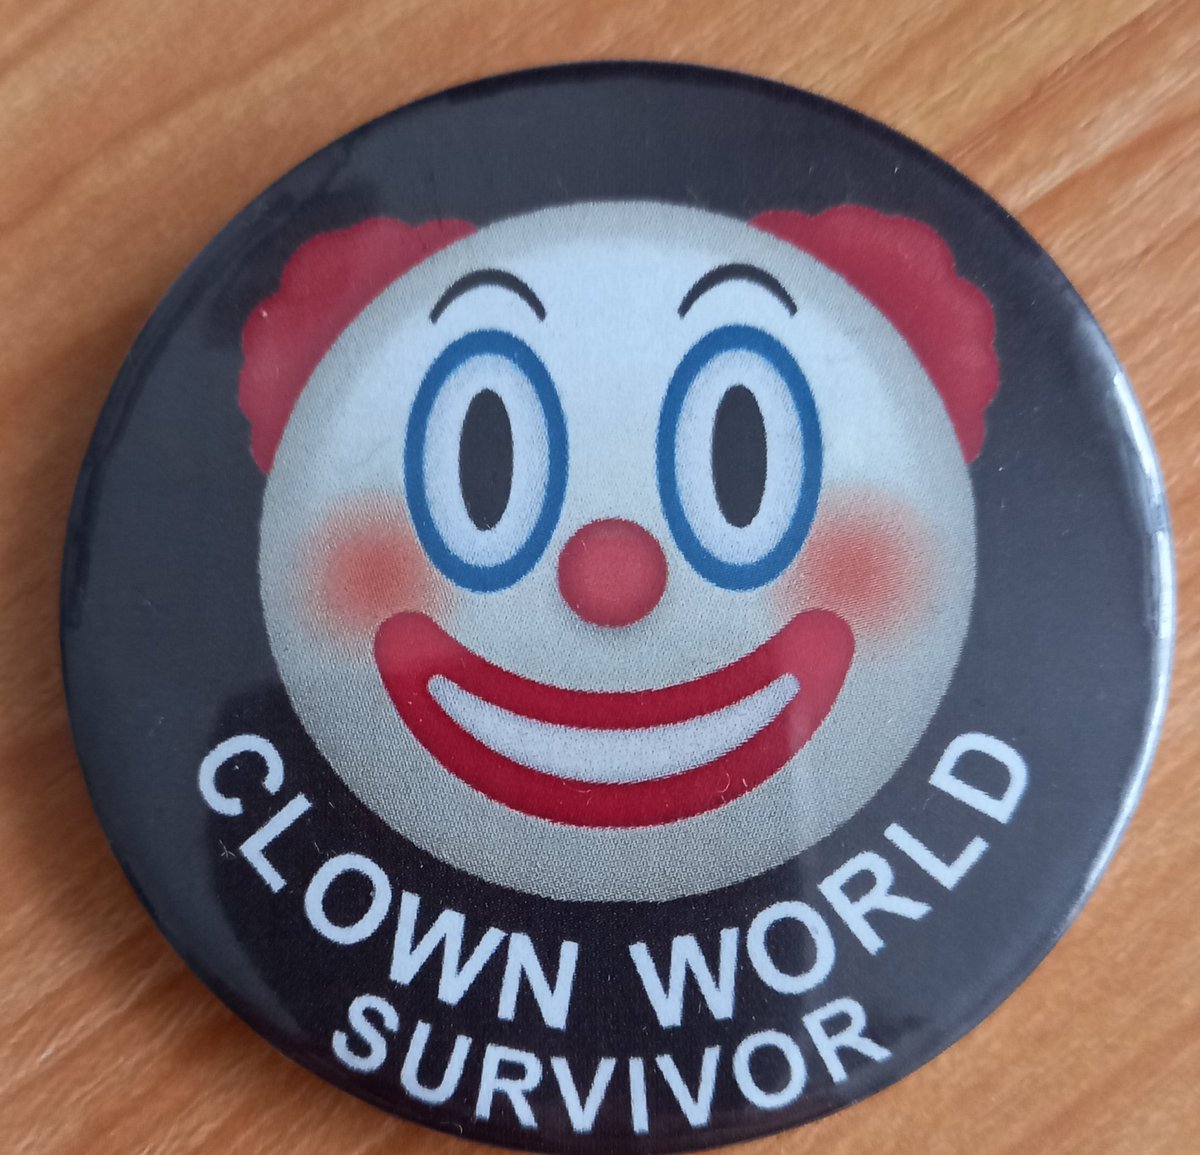 Surviving so far. Got the badge to prove it. How about you? 🤡